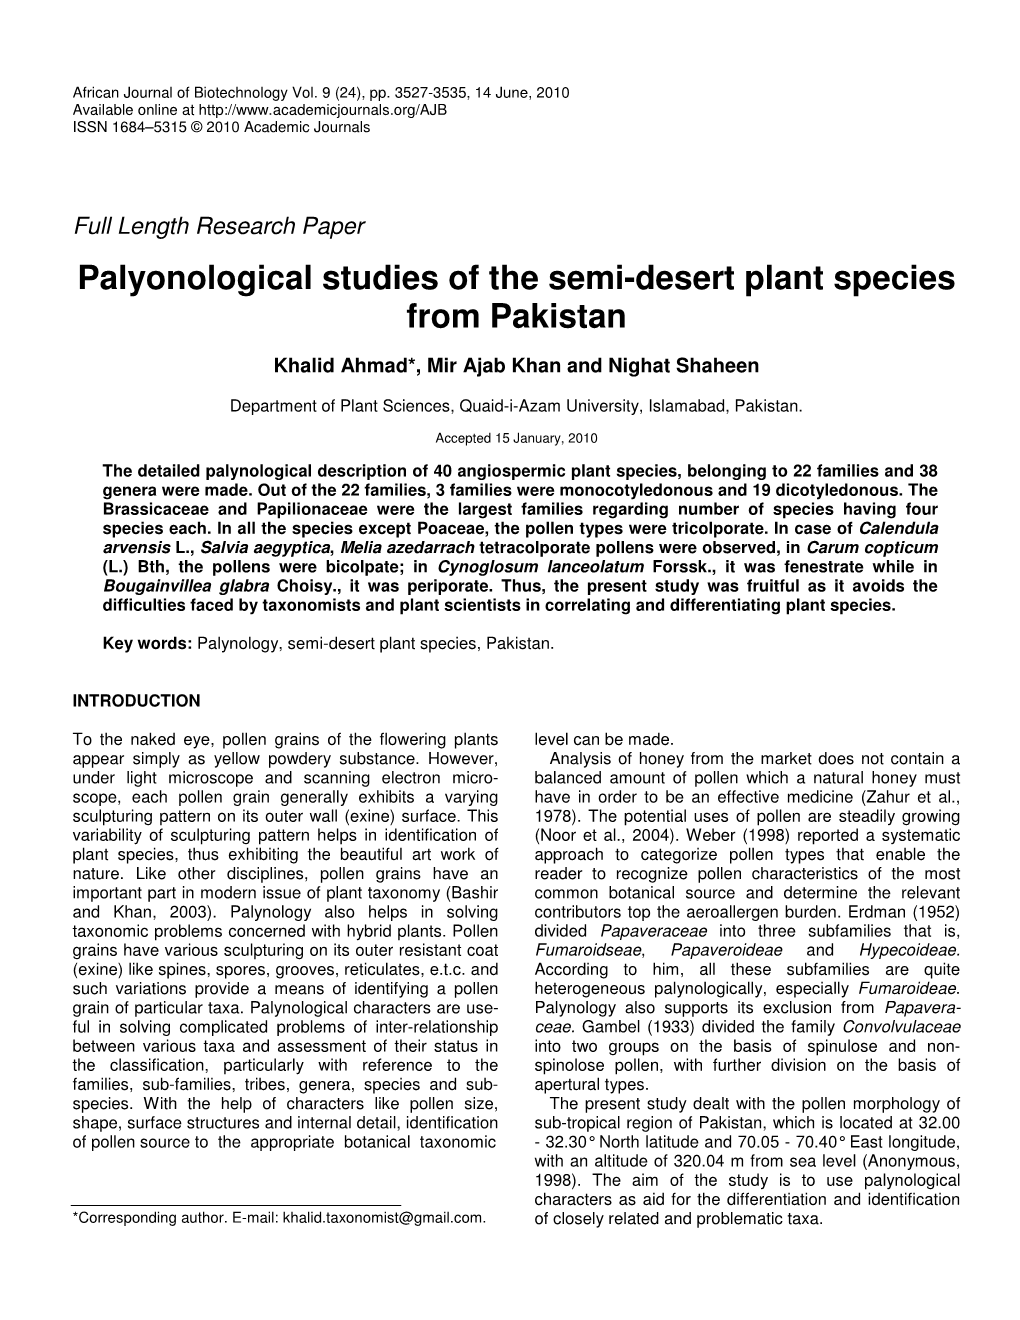 Palyonological Studies of the Semi-Desert Plant Species from Pakistan